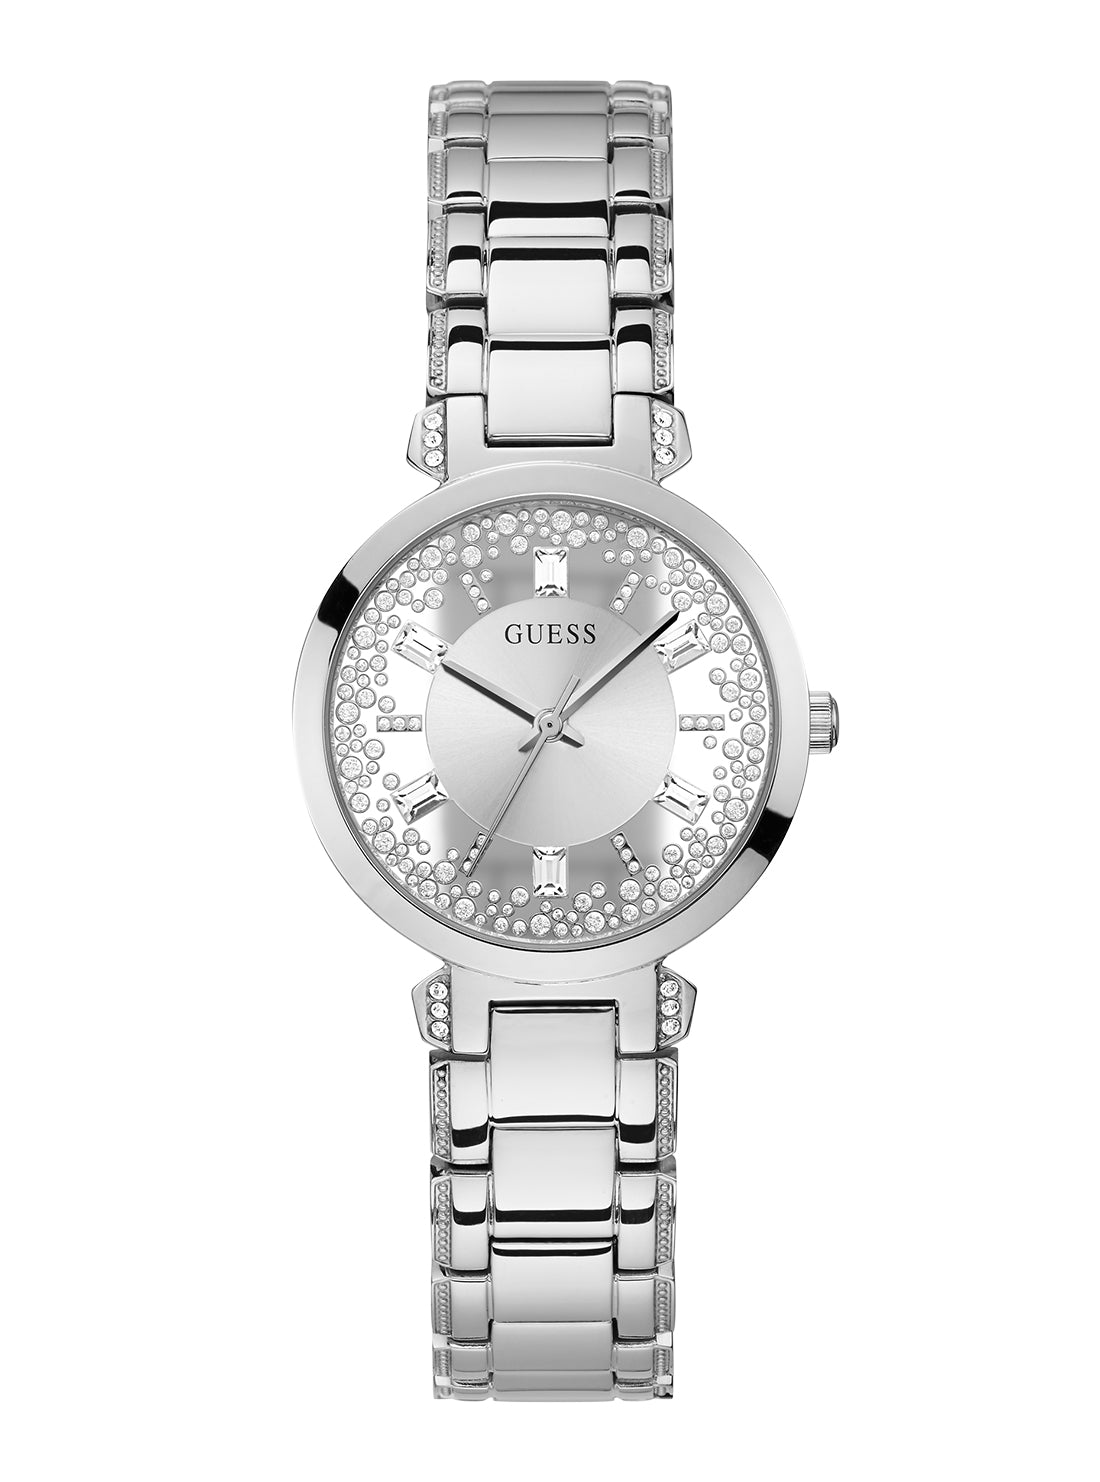 GUESS Women's Silver Crystal Clear Glitz Watch GW0470L1 Front View